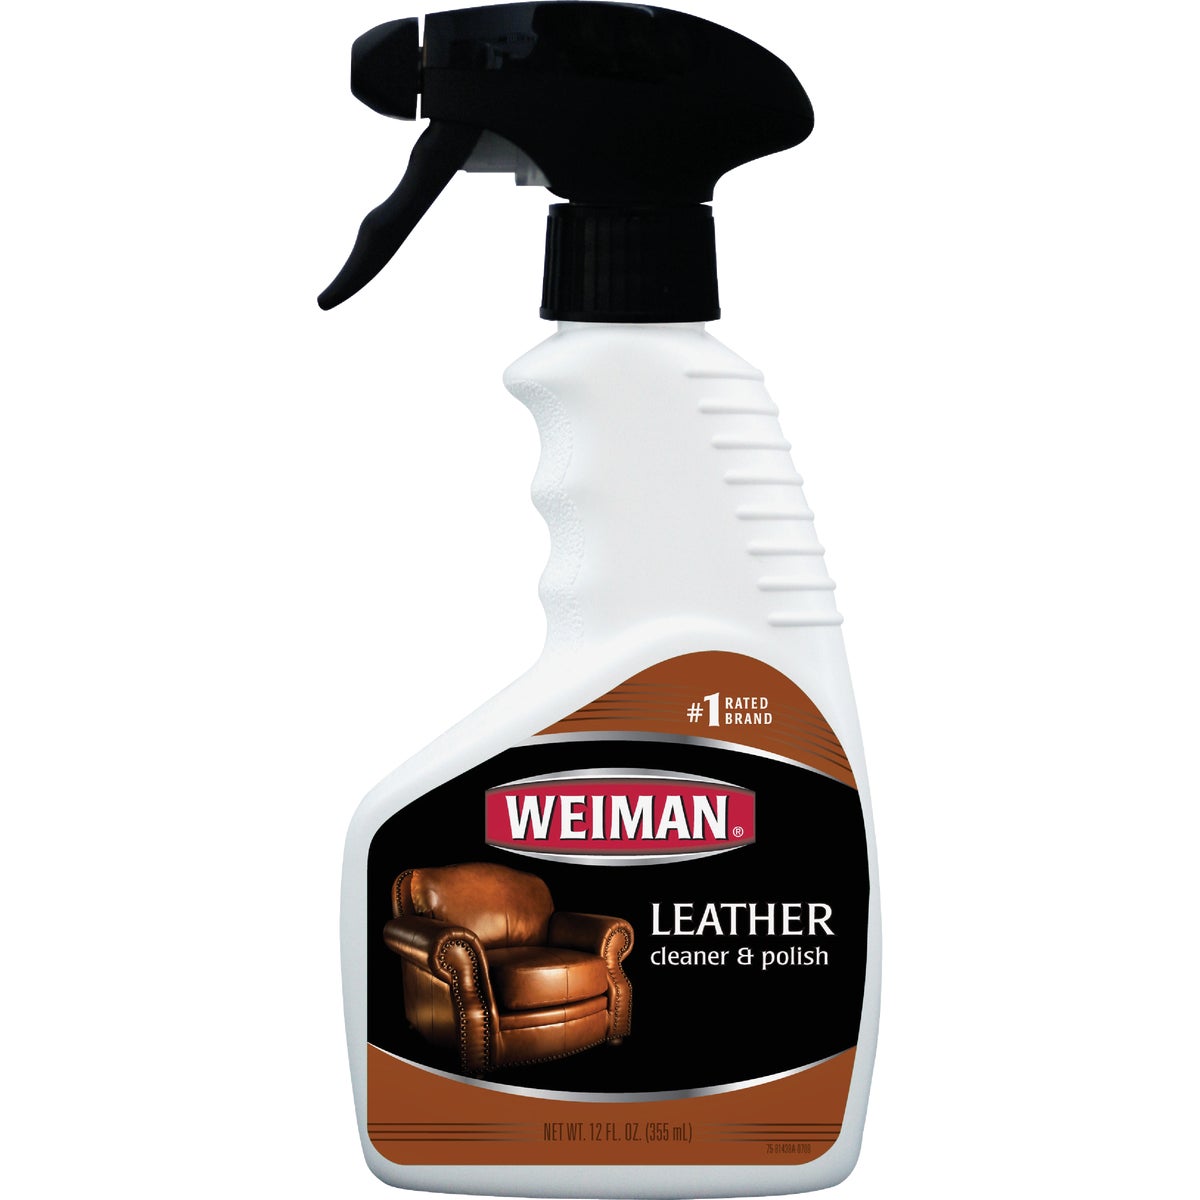 Item 617903, Leather cleaner trigger cleans, moisturizes, and conditions finished 